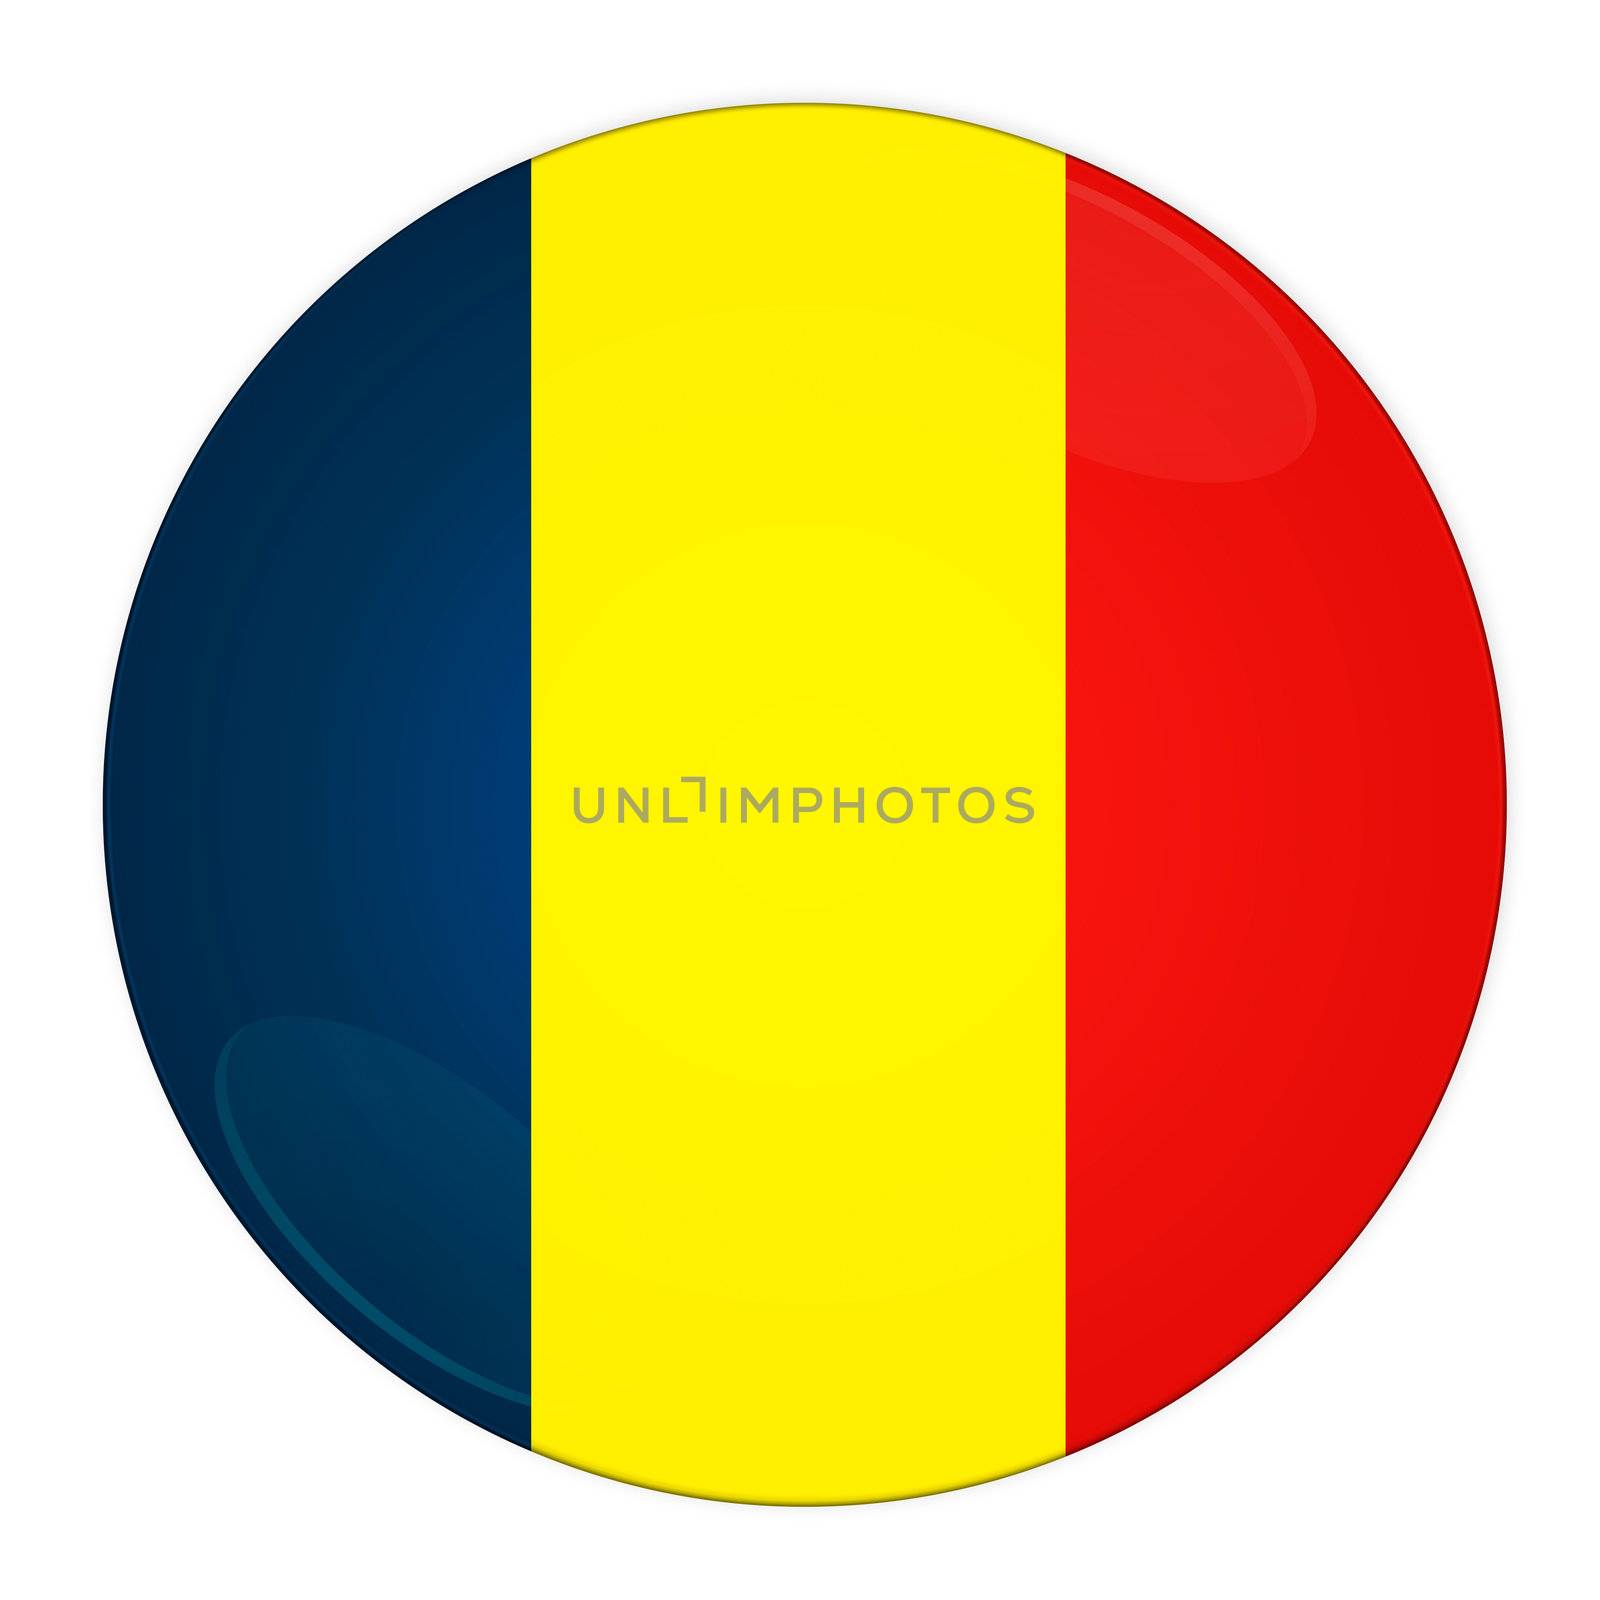 Abstract illustration: button with flag from Chad country